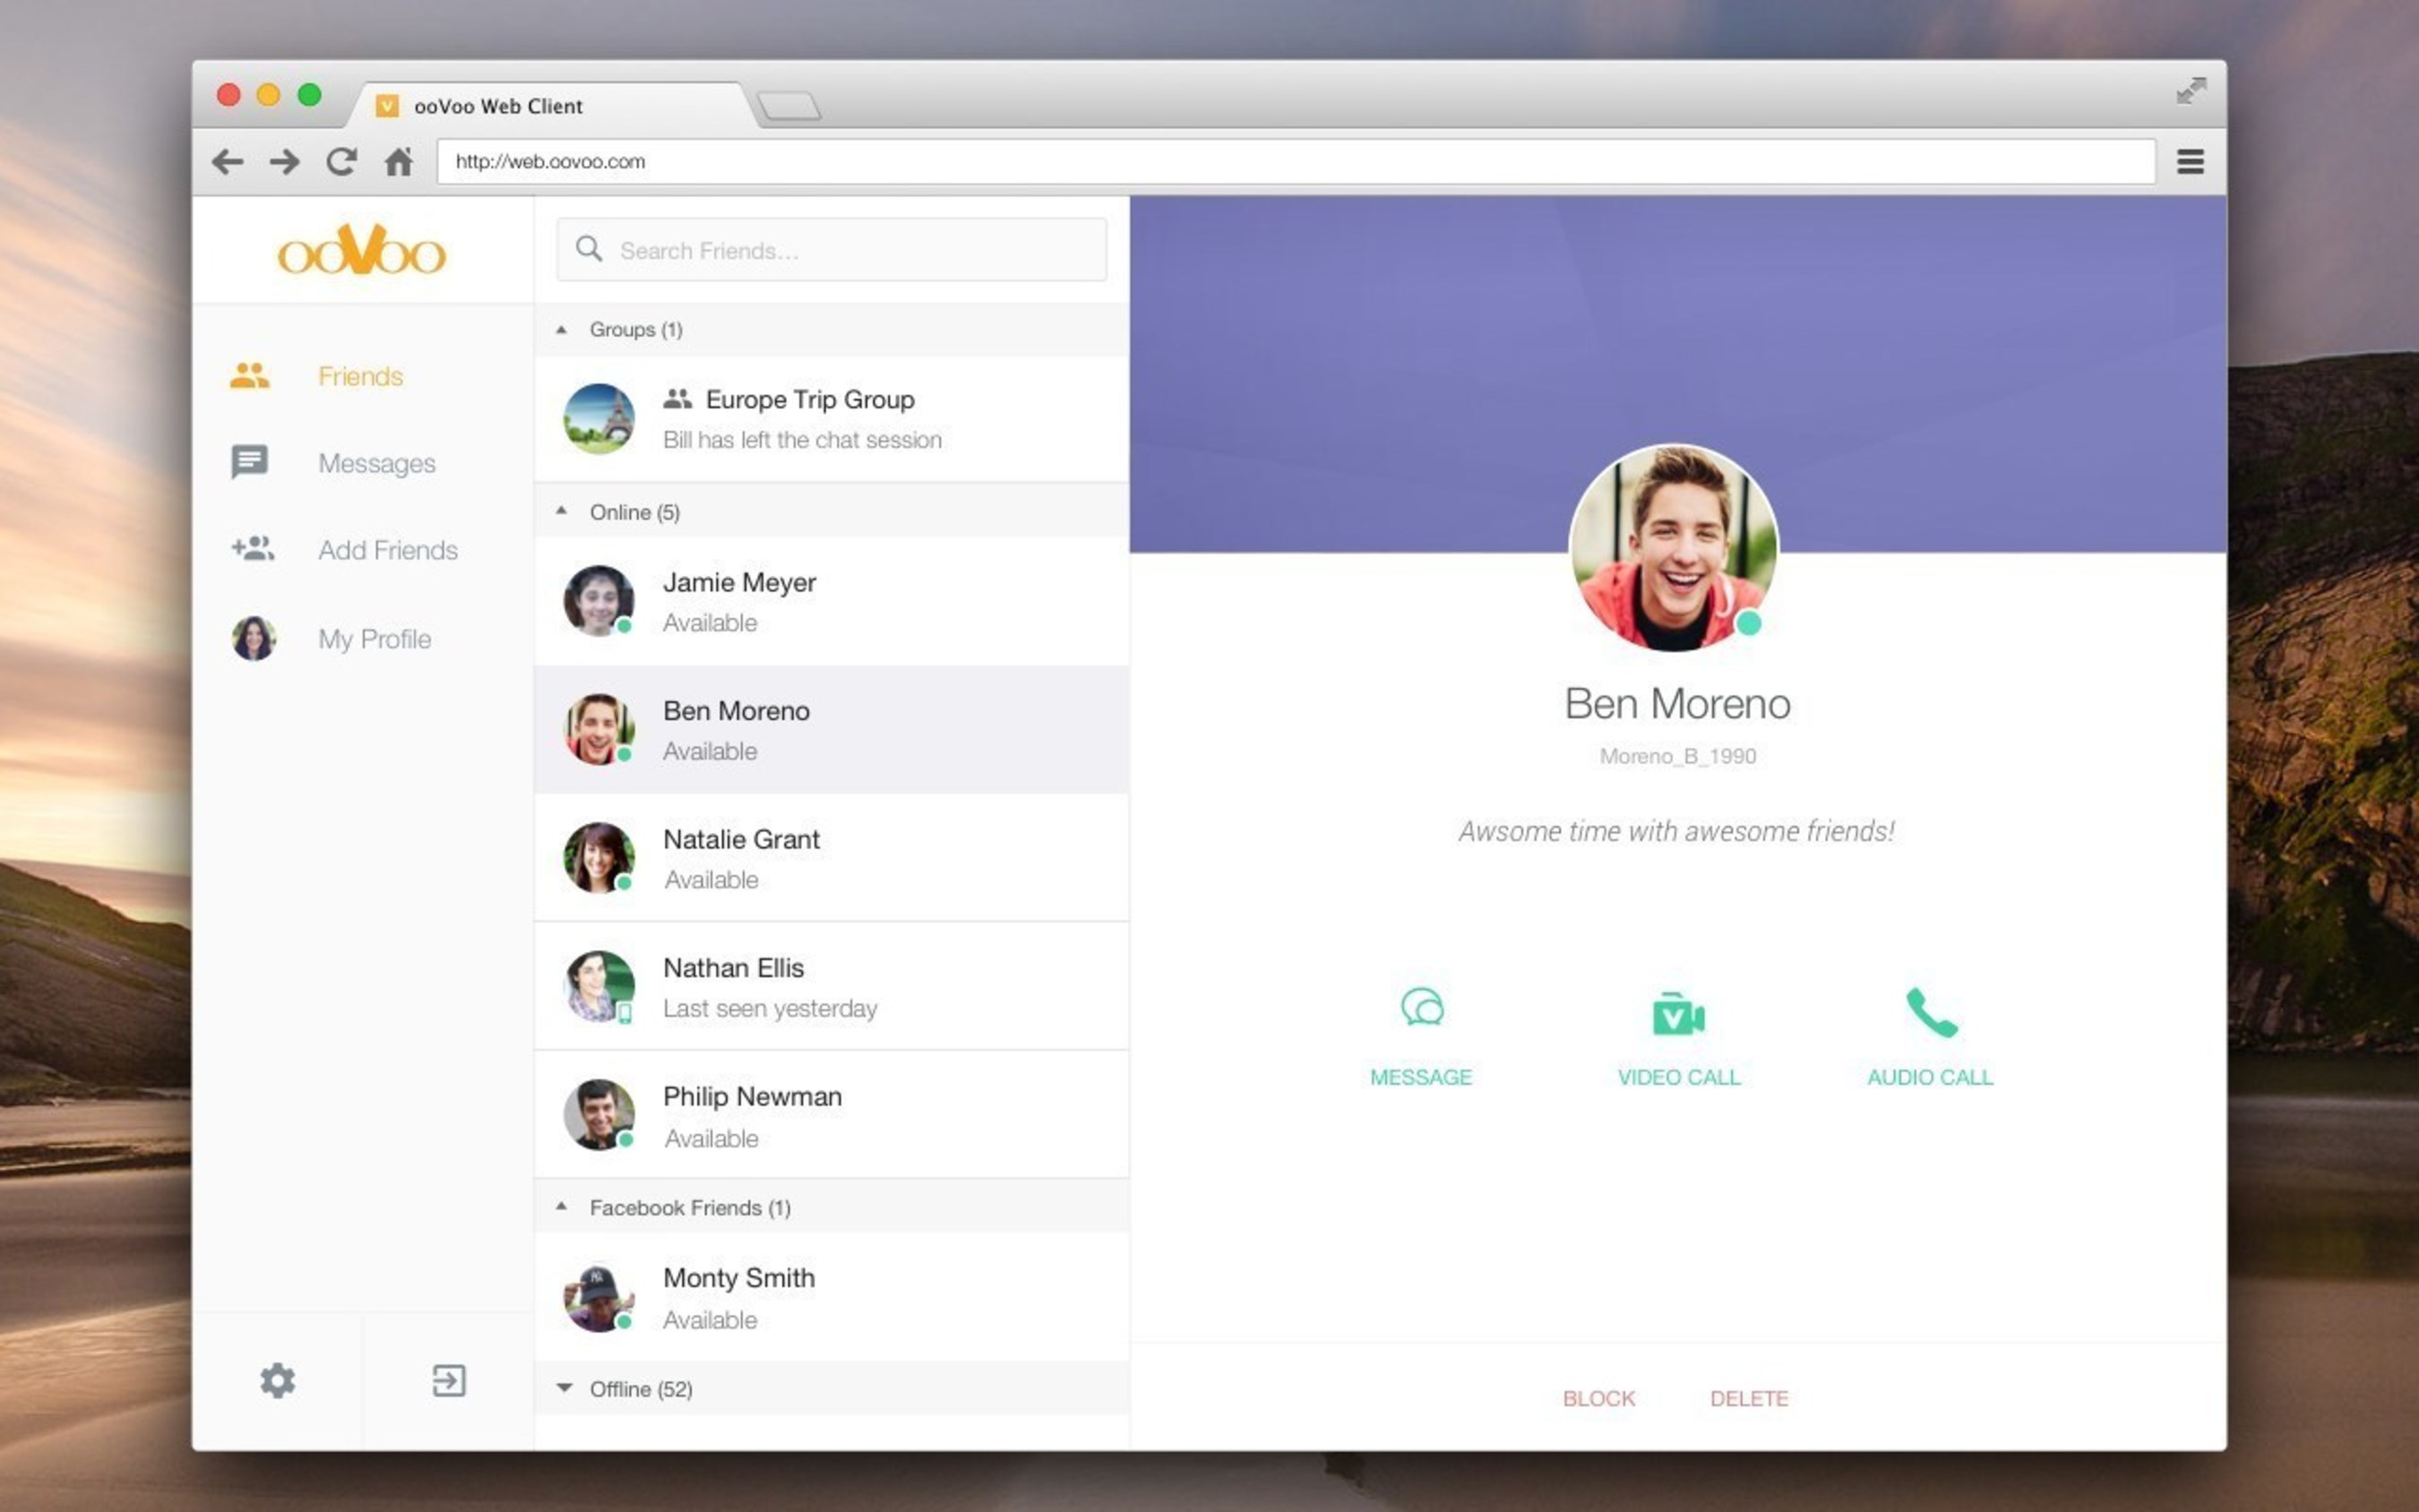 Video chat directly within compatible Internet browsers.